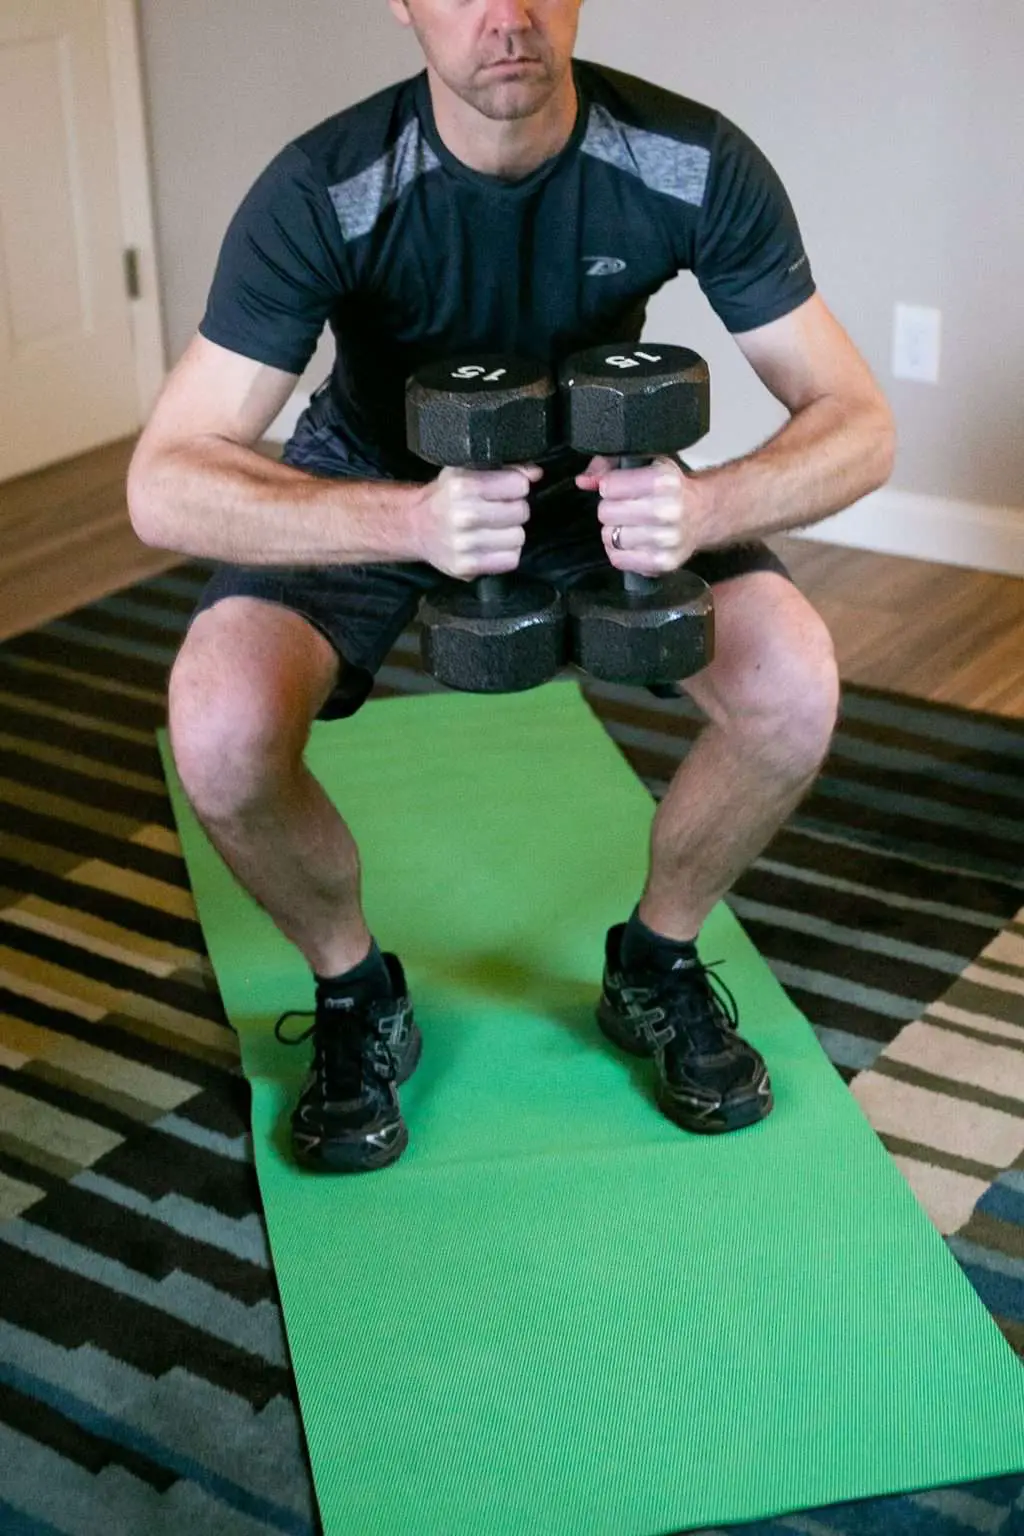 Man doing squats while holding dumbbells with each hand